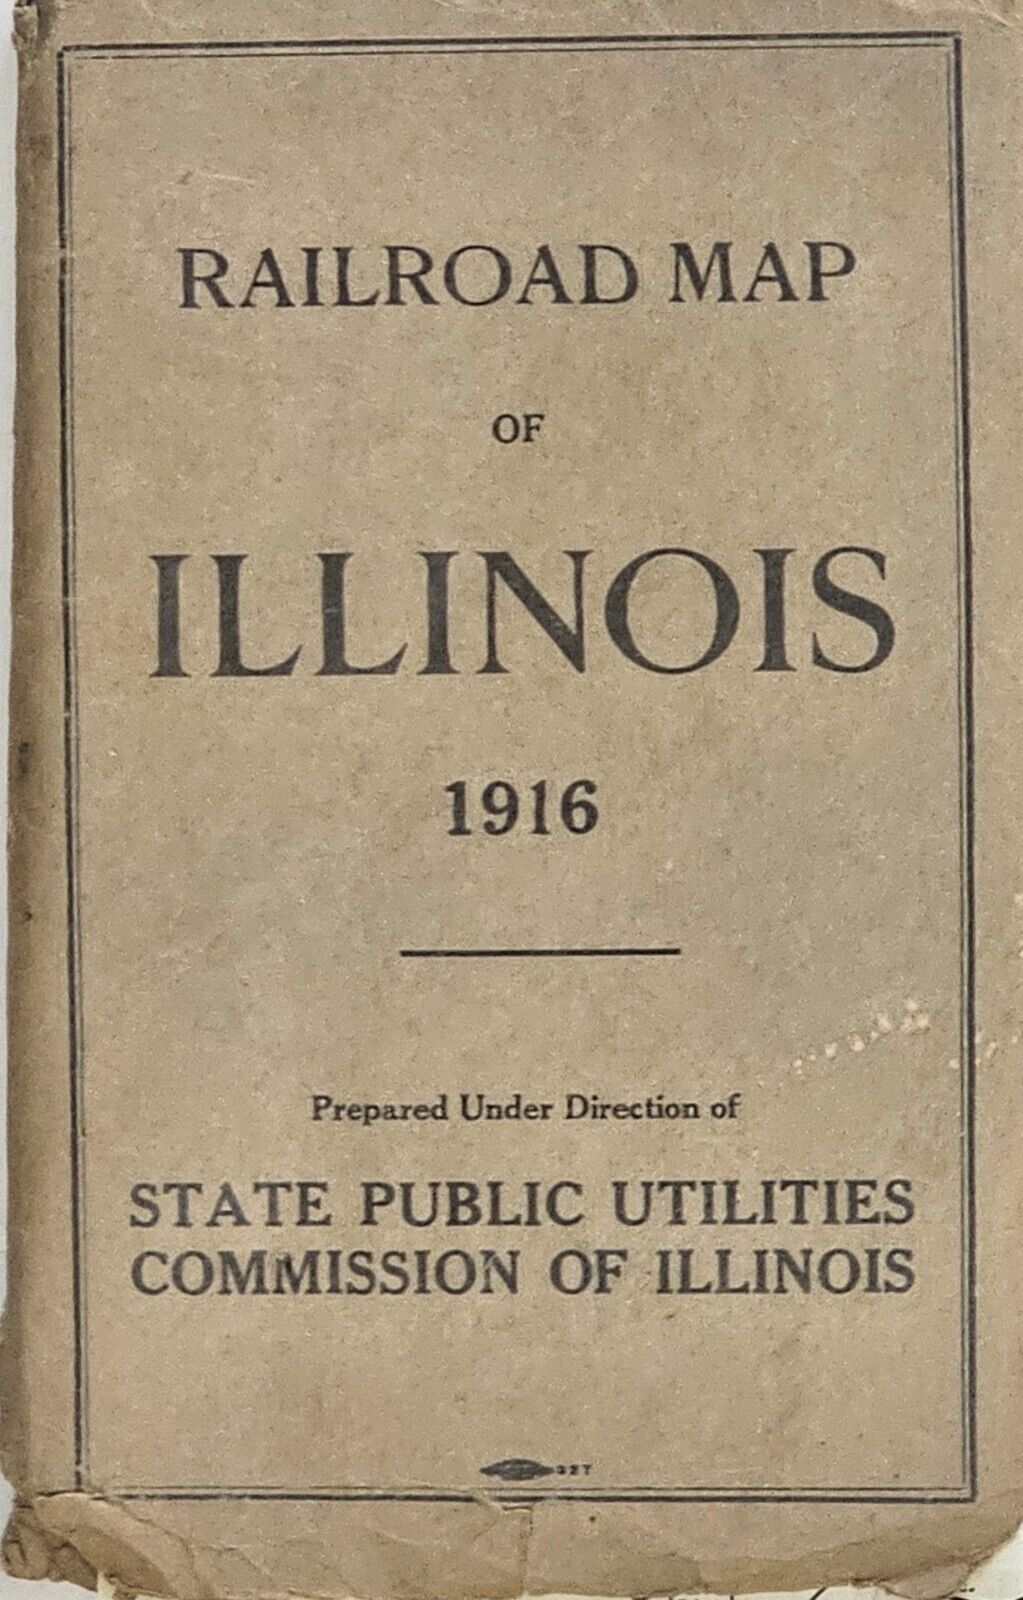 Railroad Map Of Illinois 1916  Huge Fold Out State Public Utilities